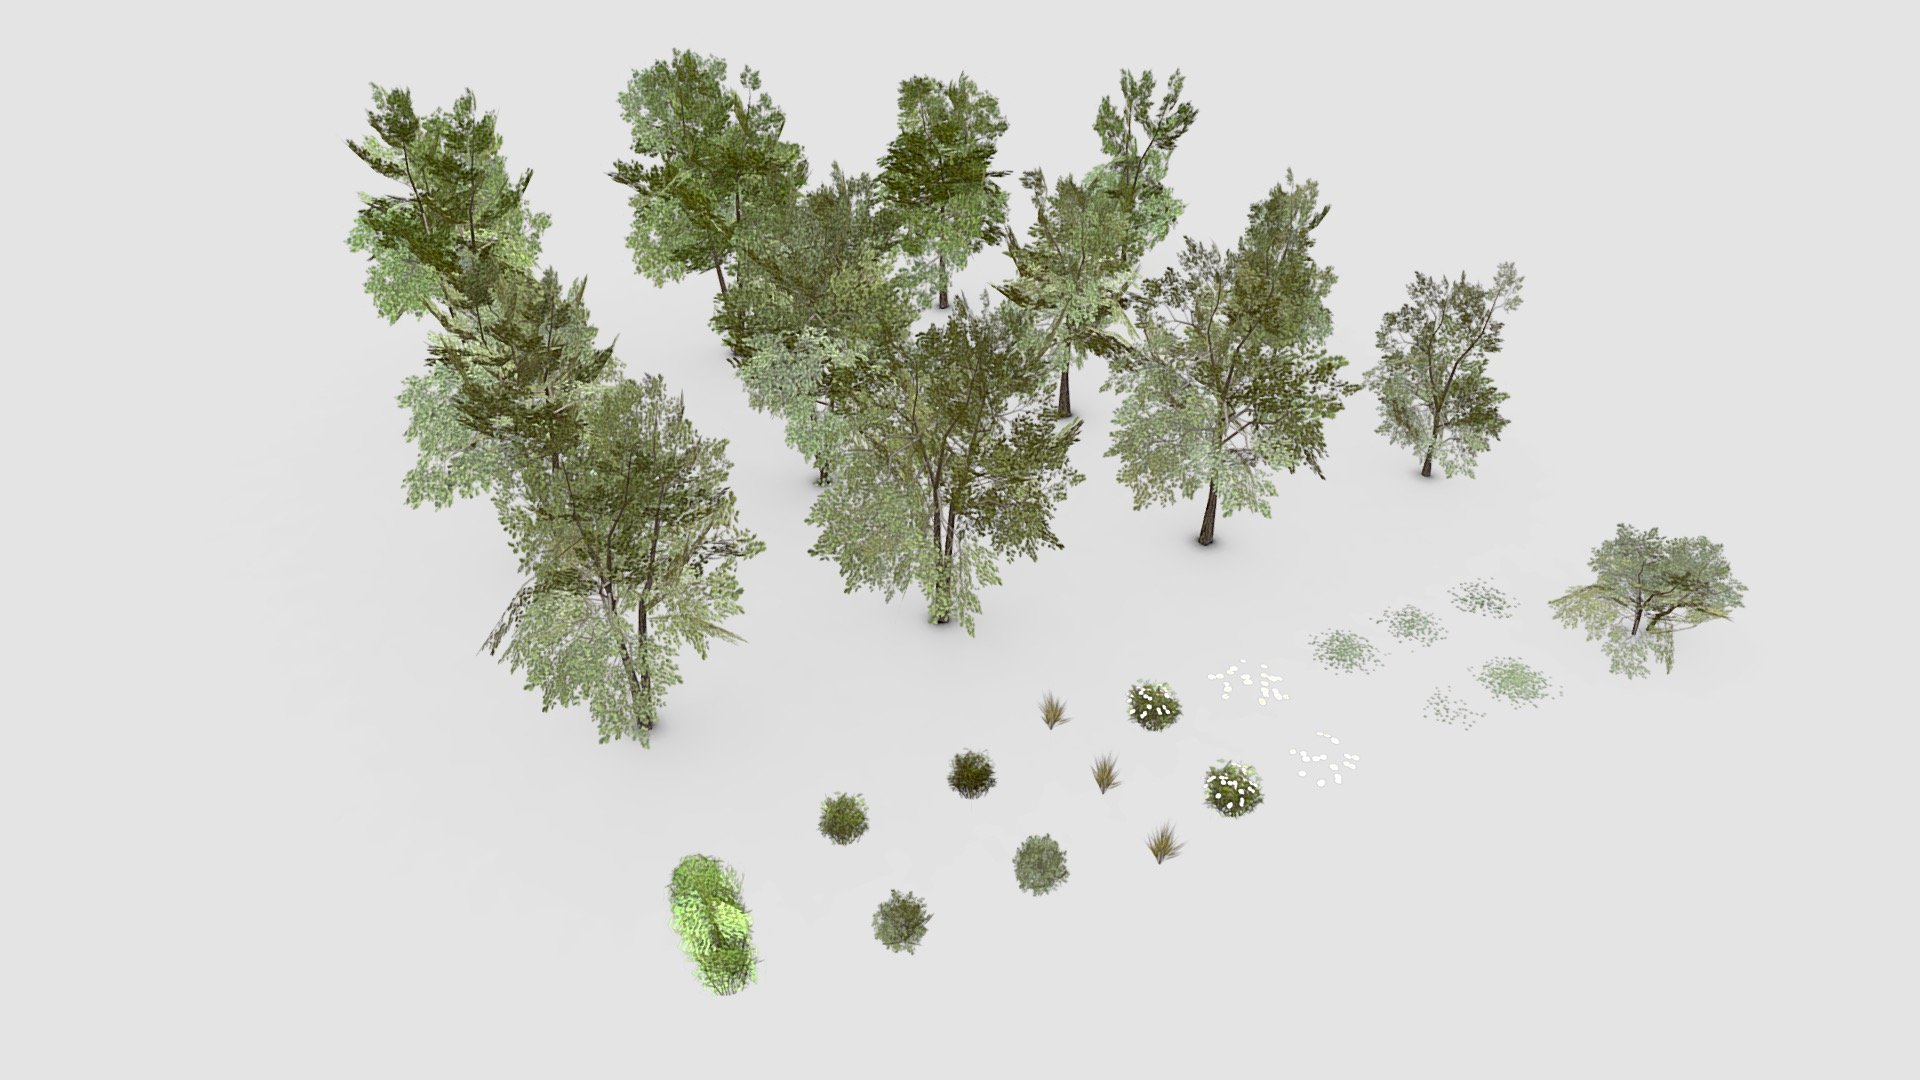 Low-poly plants kit. Handcrafted and heavily optimized for web use, while maintaining quality as high as possible. Great for architectural visualization and interior design.

The whole set is made up out of 30 objects, including 12 trees and has a complexity of just 7,600 triangles.

Source files are available at github repository: 
https://github.com/shapespark/shapespark-assets

Licensing type: CC0 1.0, no rights reserved.

Created by Shapespark

Shapespark is a real-time rendering engine that allows you to create and share online 3D walkthroughs. Find out more at: www.shapespark.com - Shapespark low poly exterior plants kit - Download Free 3D model by Shapespark 3d model